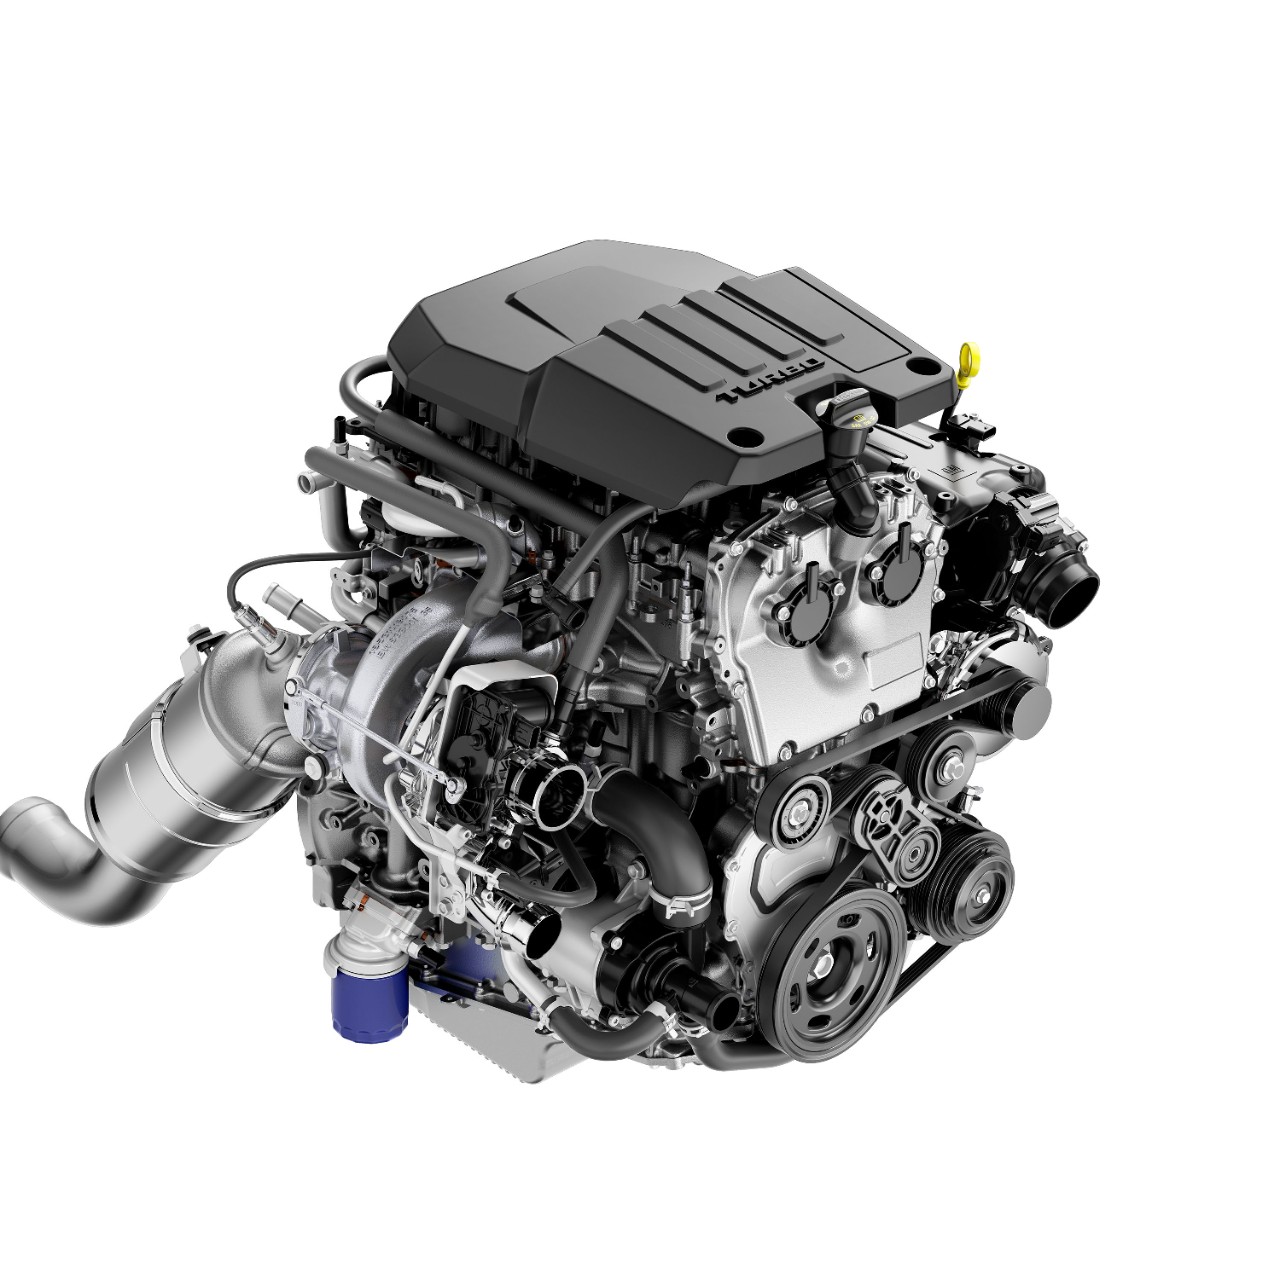 GM Gives 2.7L Turbo-4 Engine A New Name - Meet TurboMax